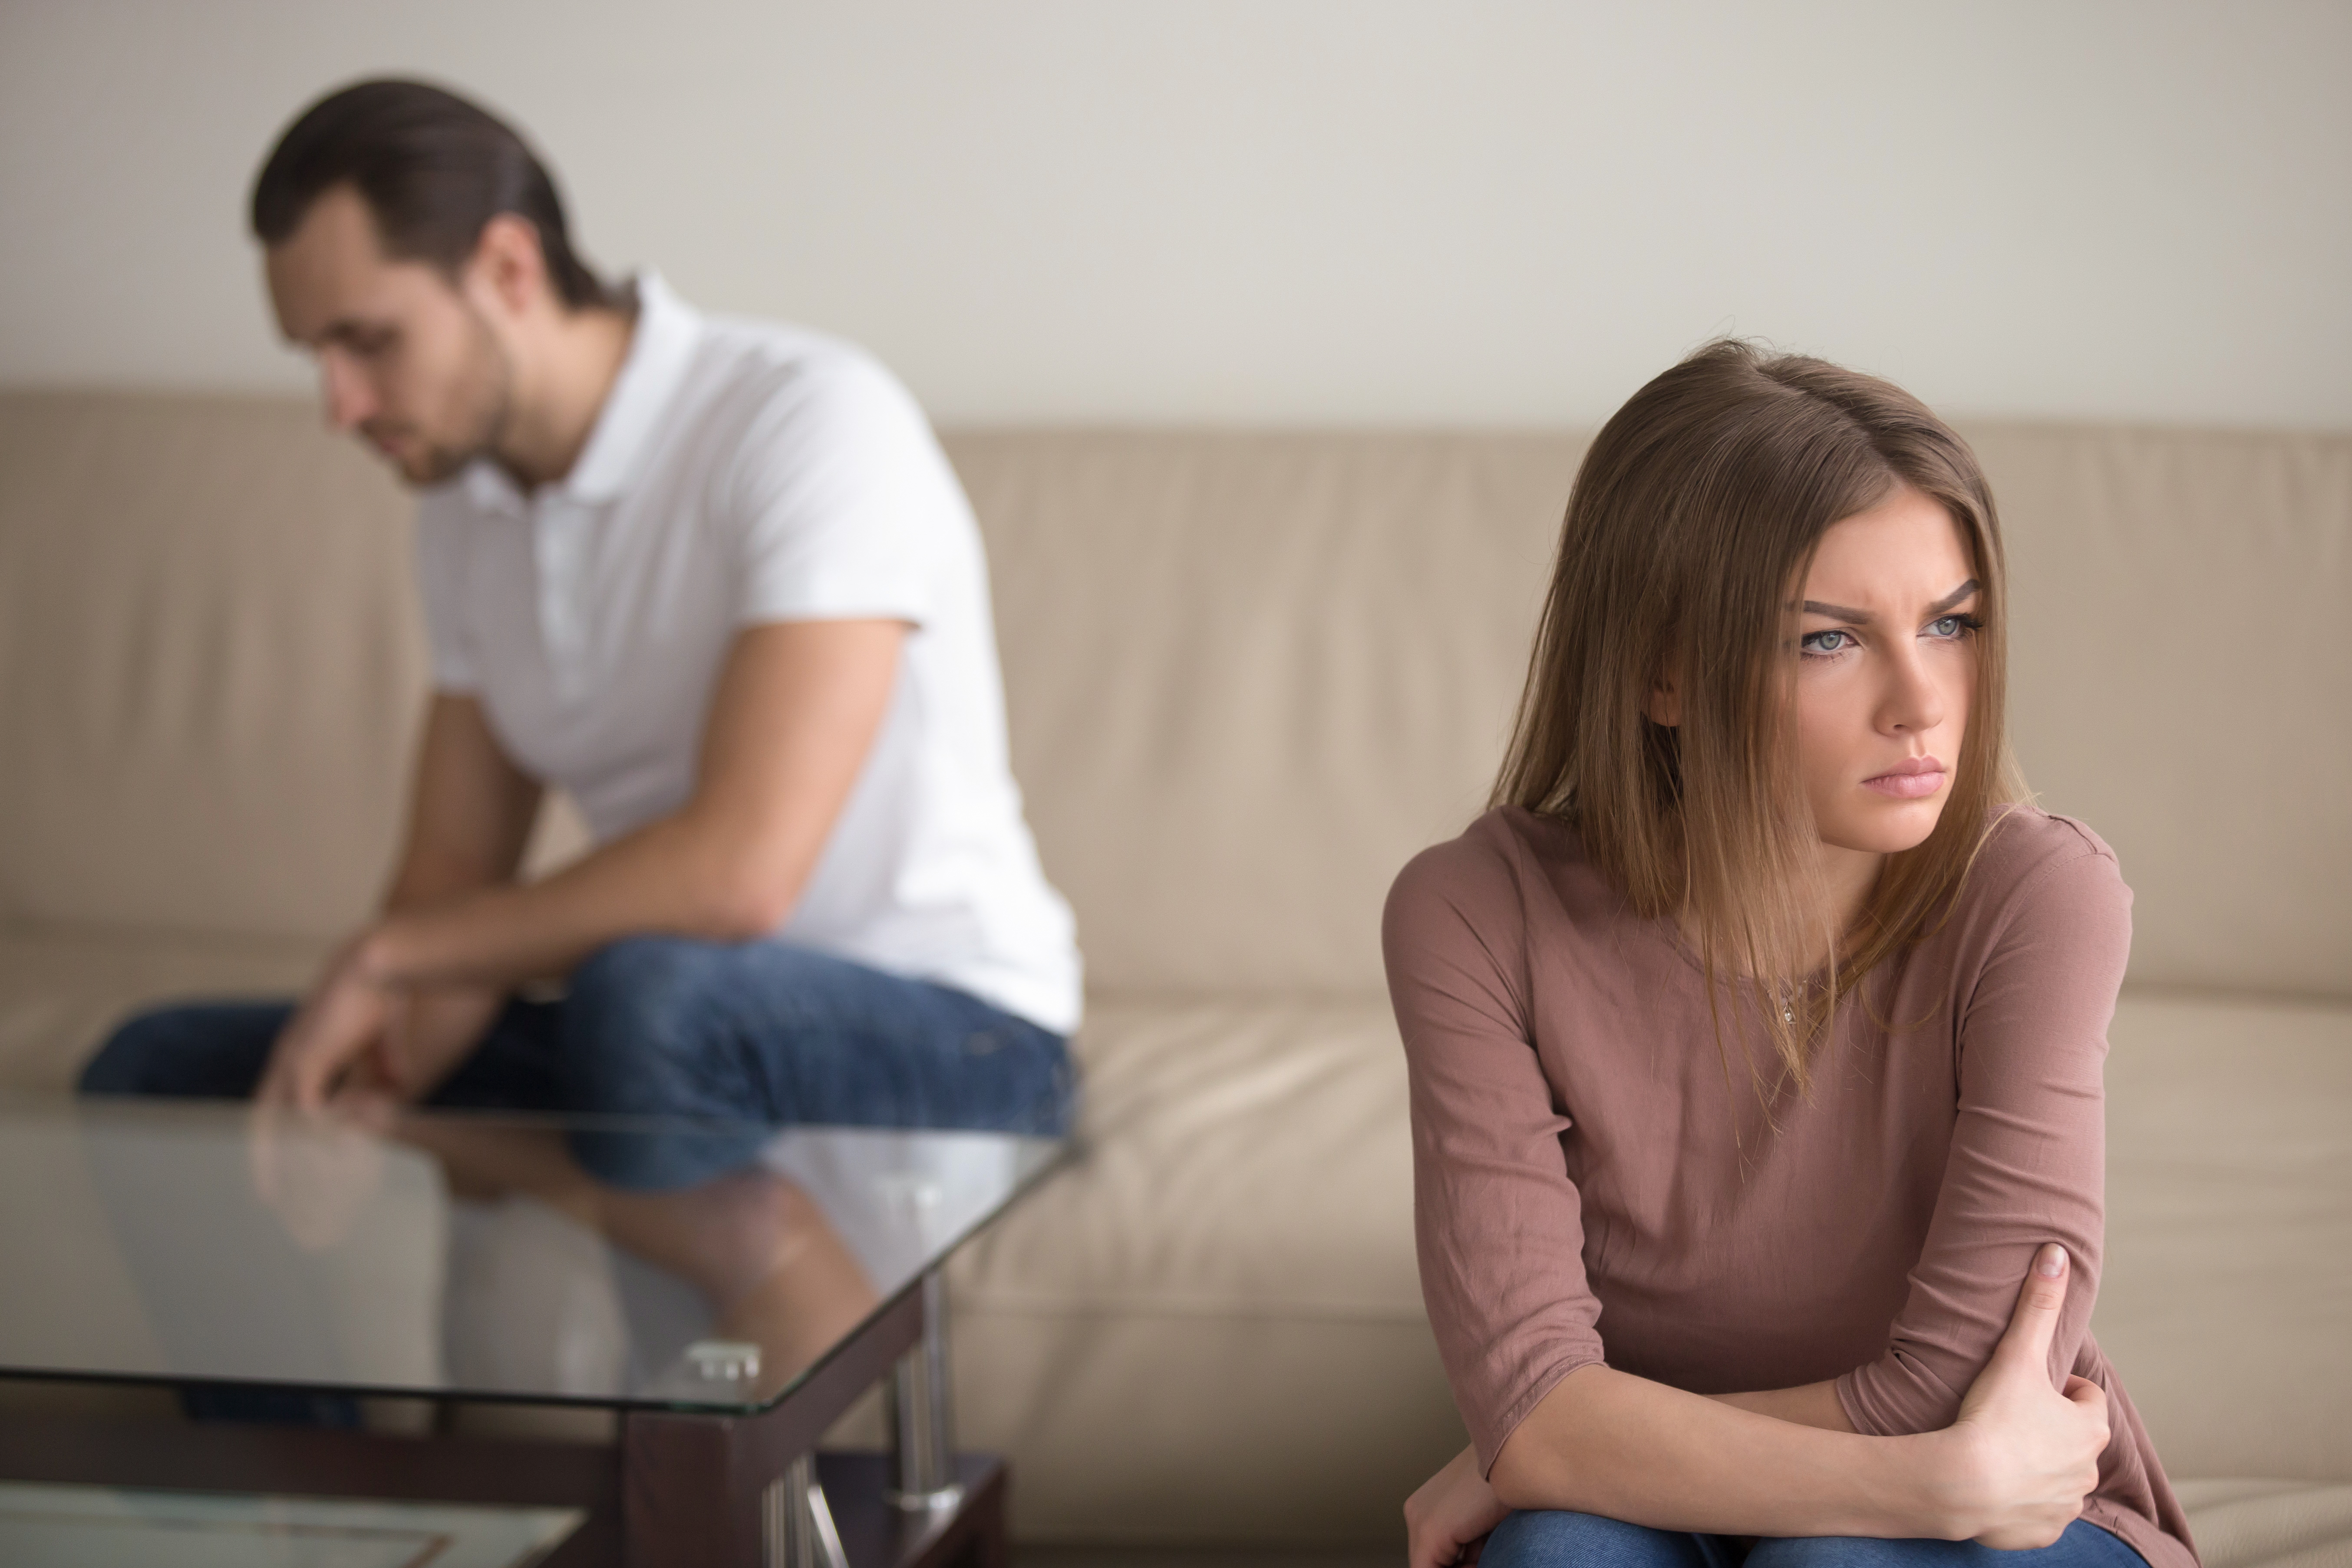 A married couple not talking to one another | Source: Shutterstock